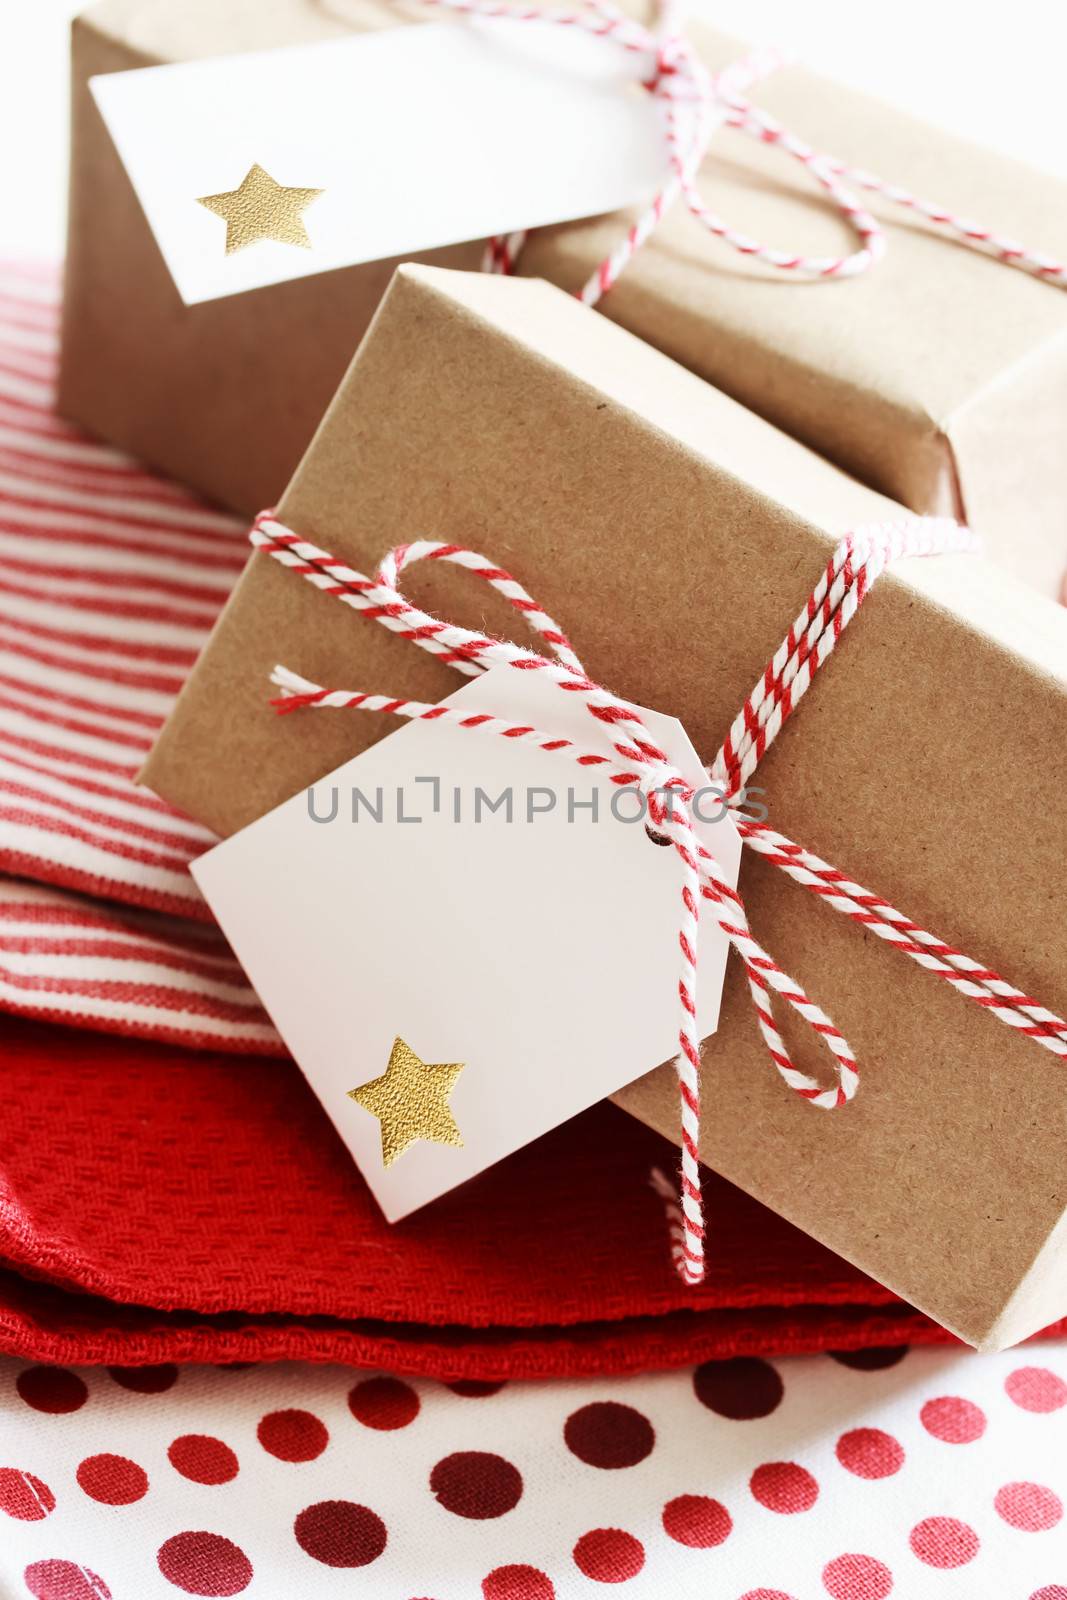 Handmade present boxes with tags on red napkins